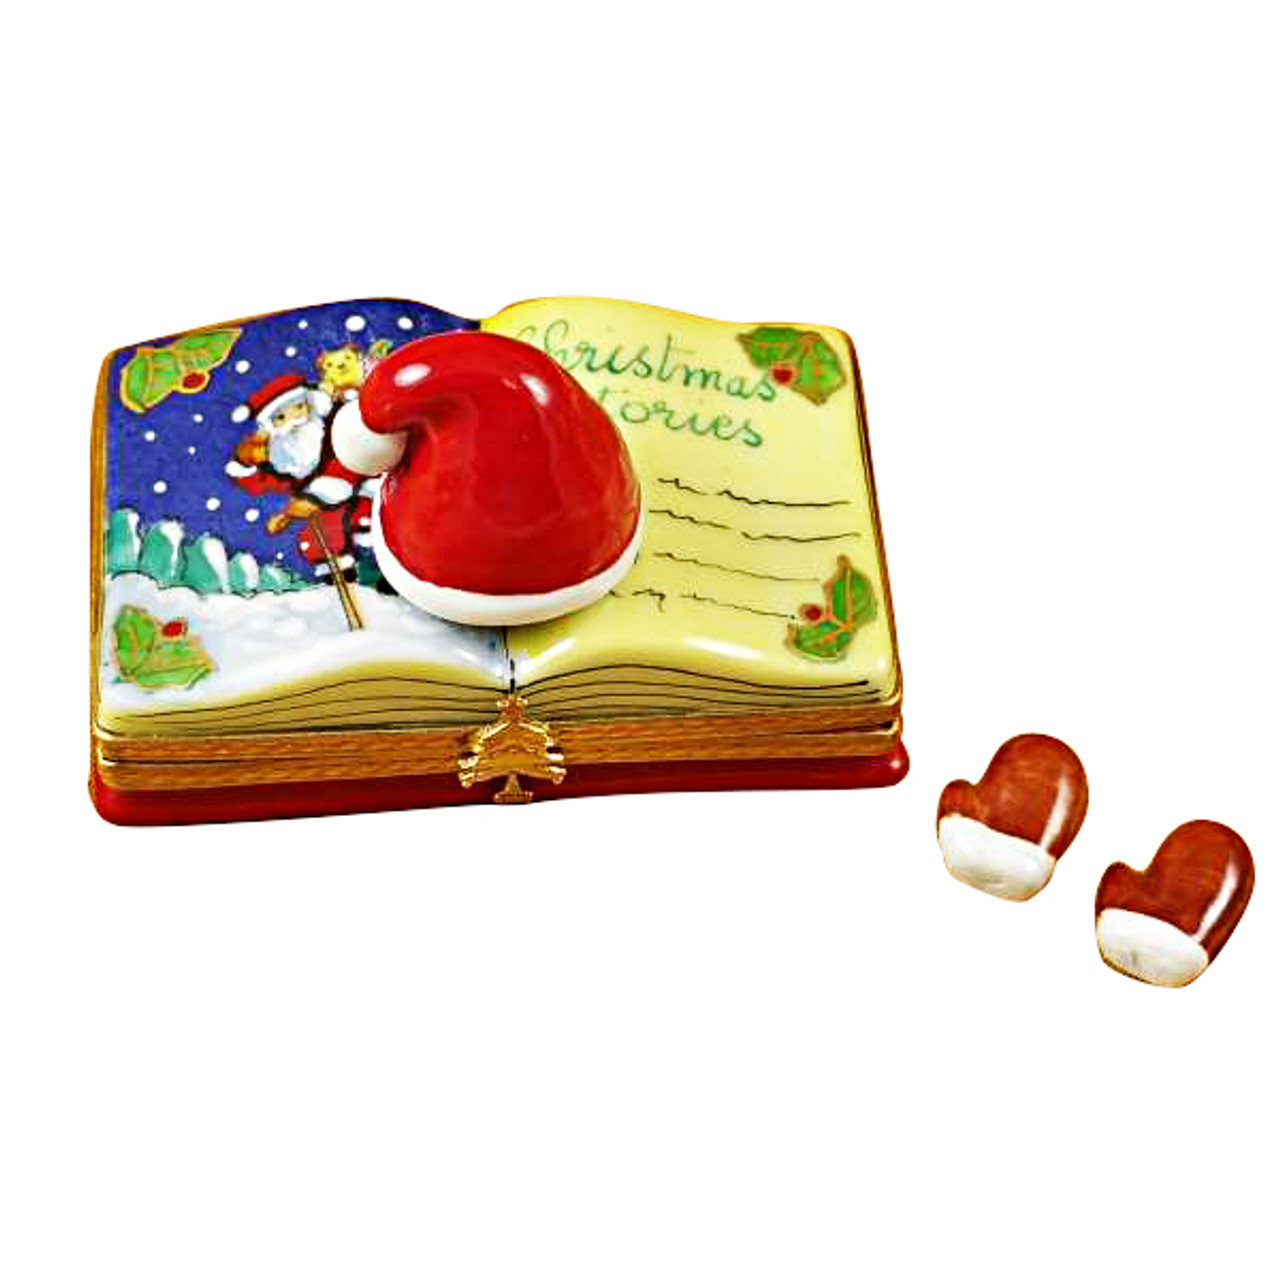 Christmas Book "Christmas Stories" With Removable Gloves Rochard Limoges Box